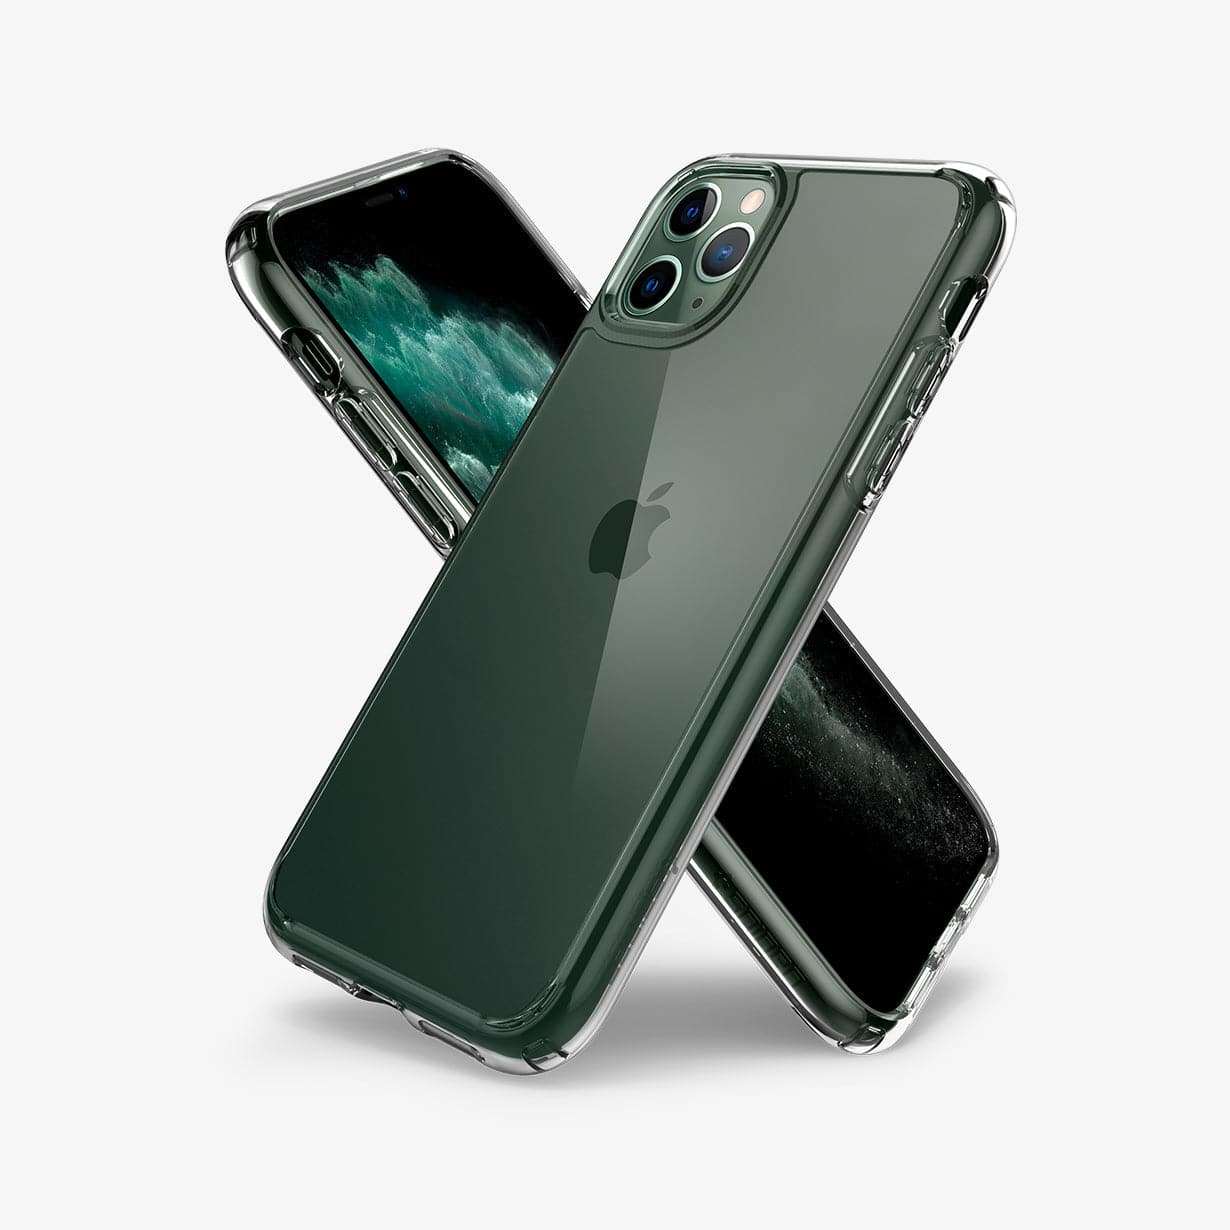 Here's Spigen's iPhone 11, iPhone 11 Pro and iPhone 11 Pro Max case series